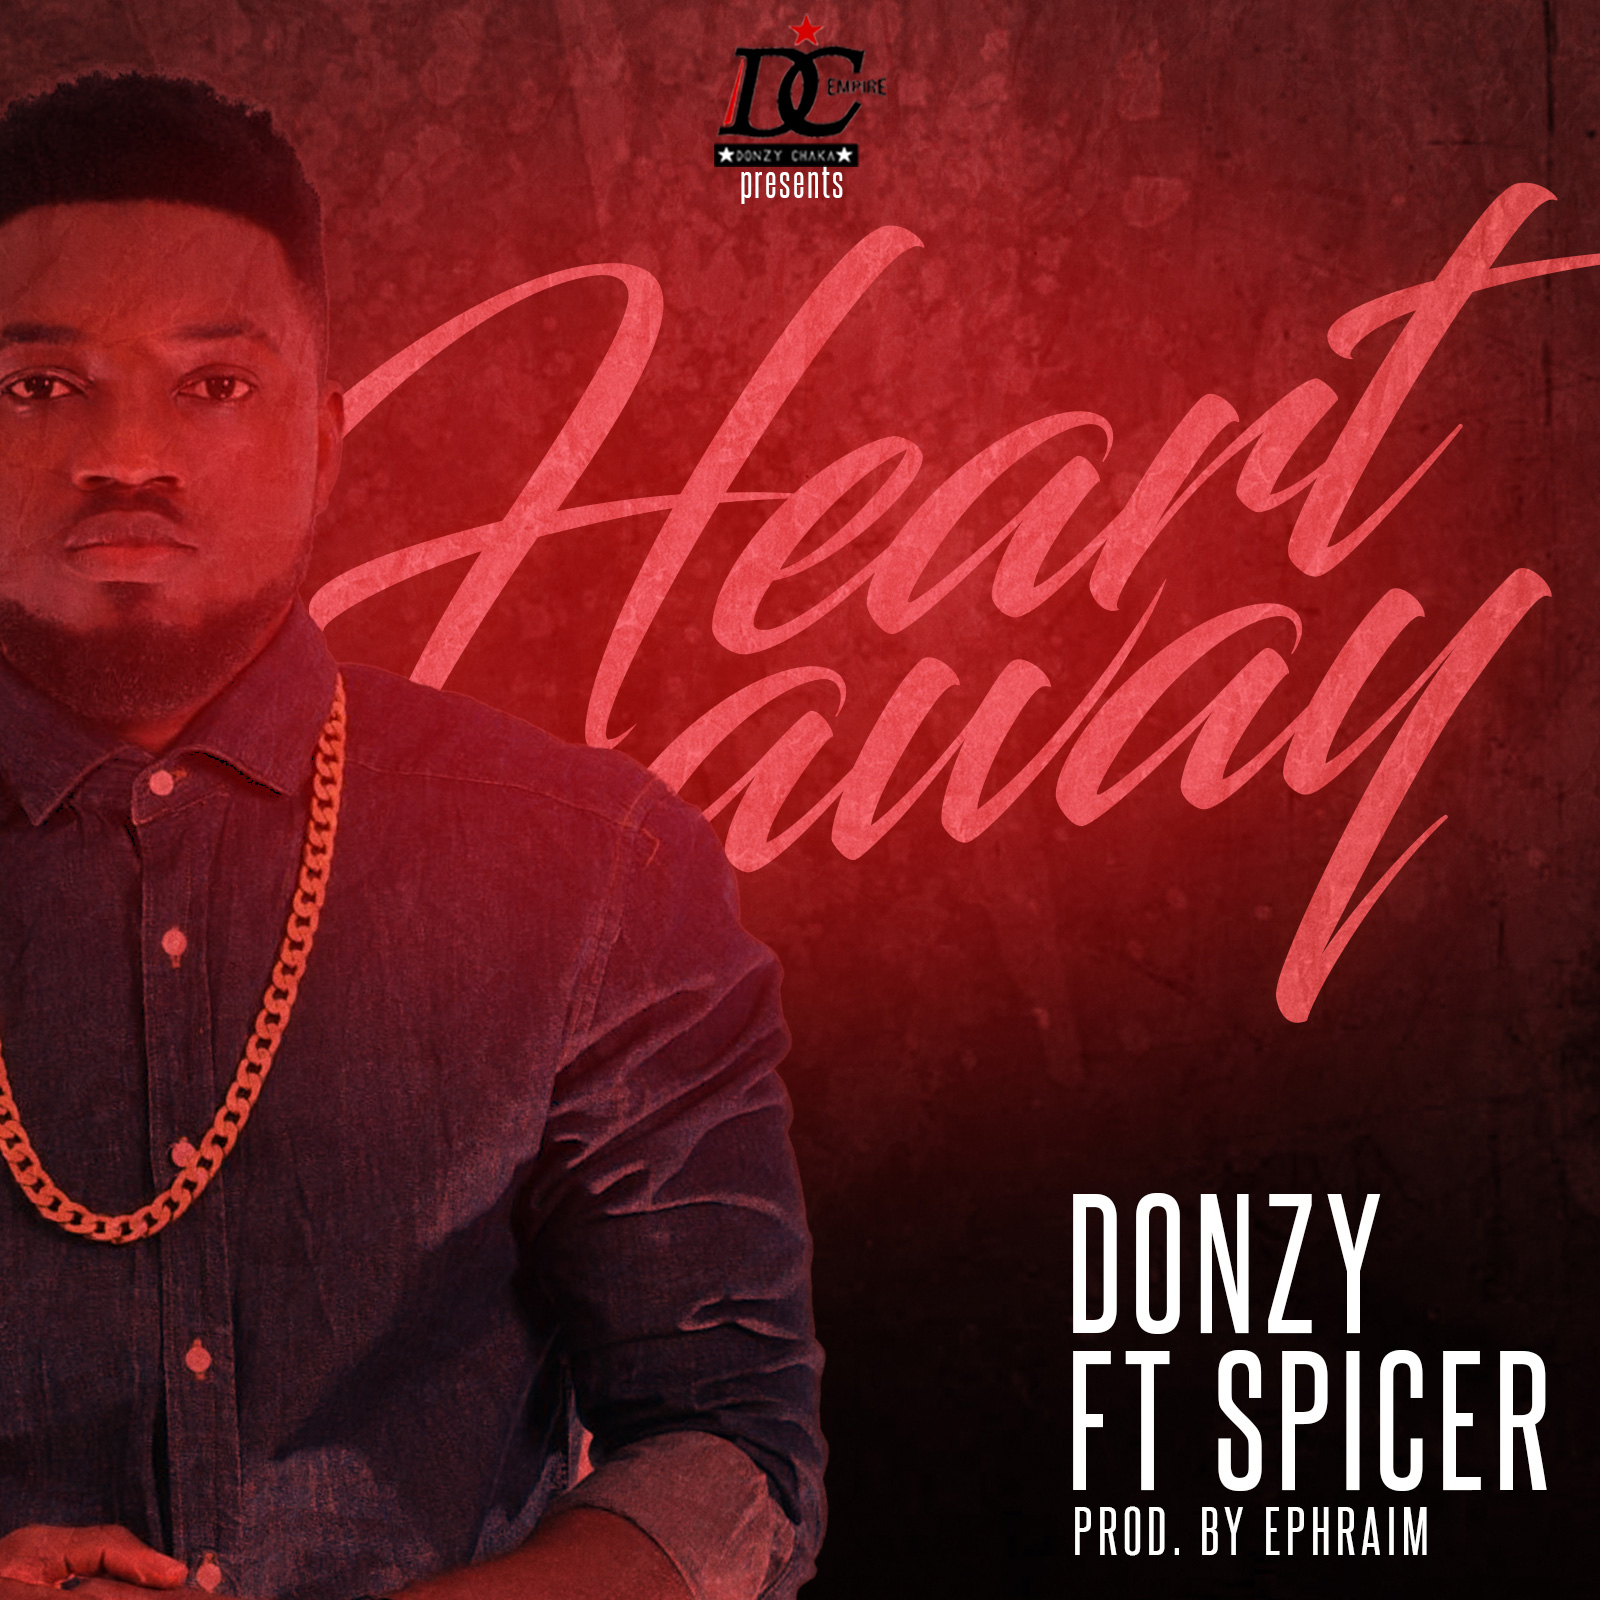 Heart Away by Donzy feat. Spicer